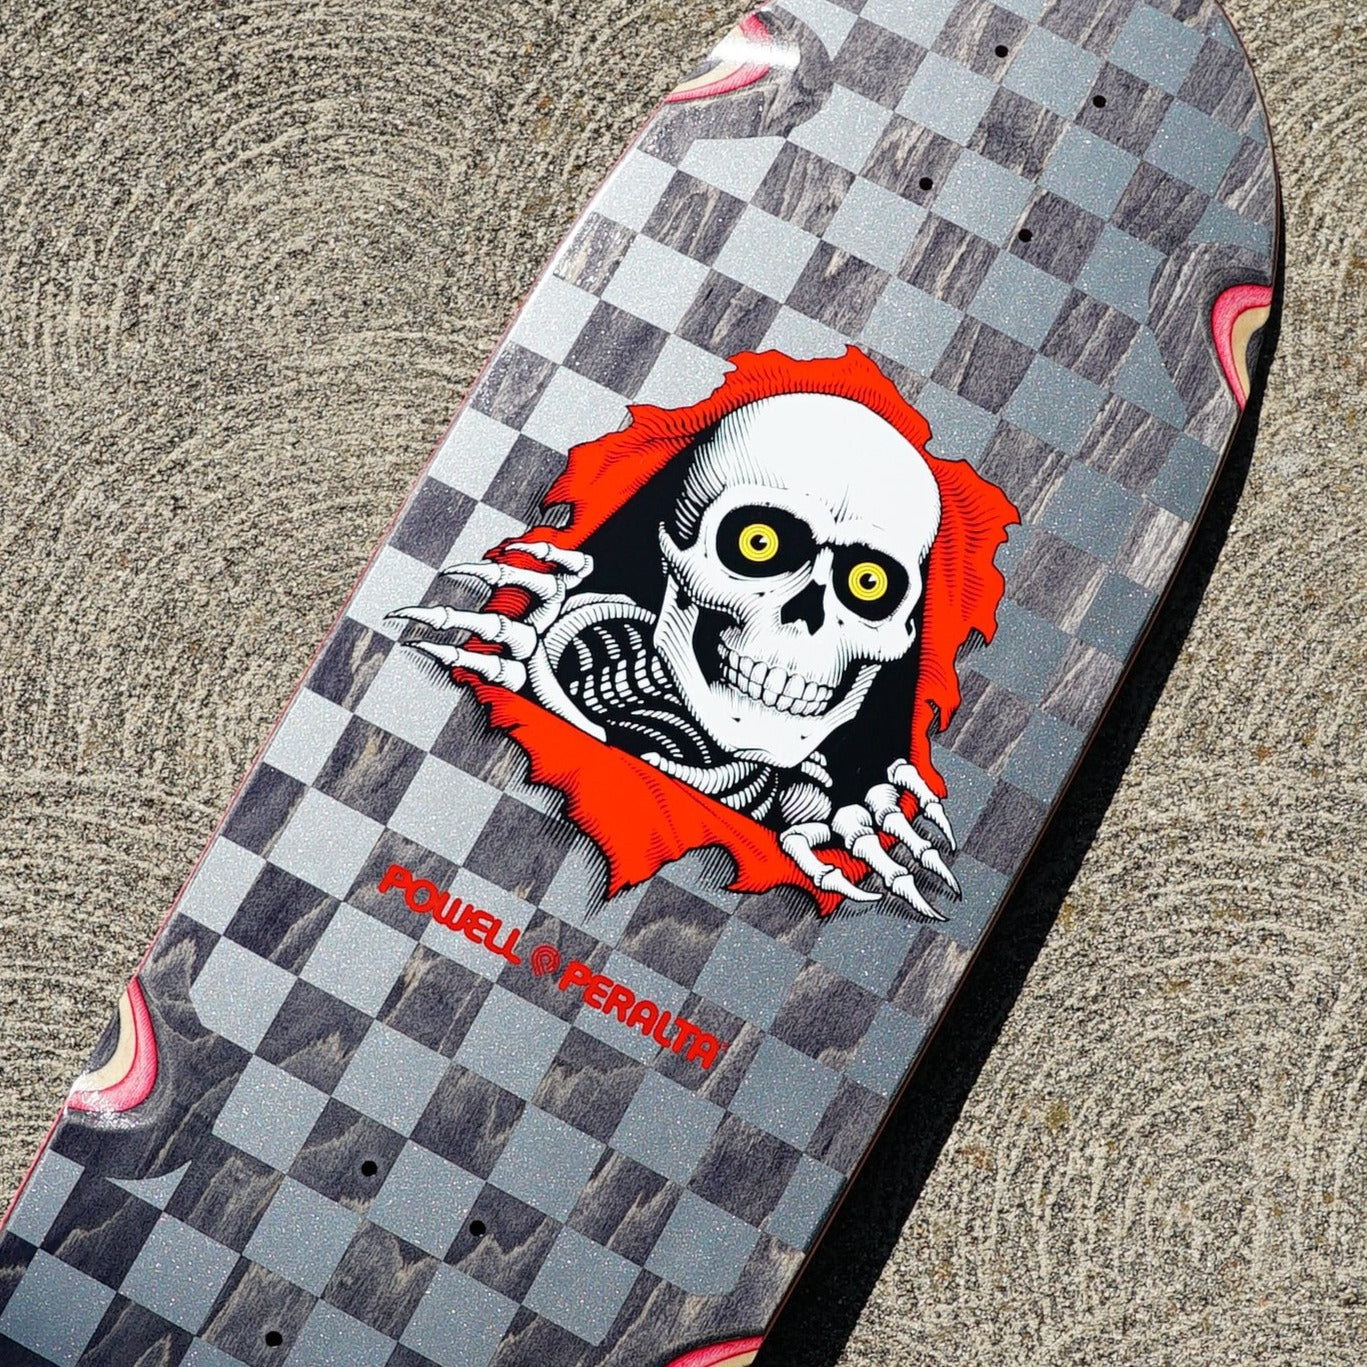 POWELL PERALTA DECK OG RIPPER CHECKERED SILVER/BLACK STAIN (10") - The Drive Skateshop